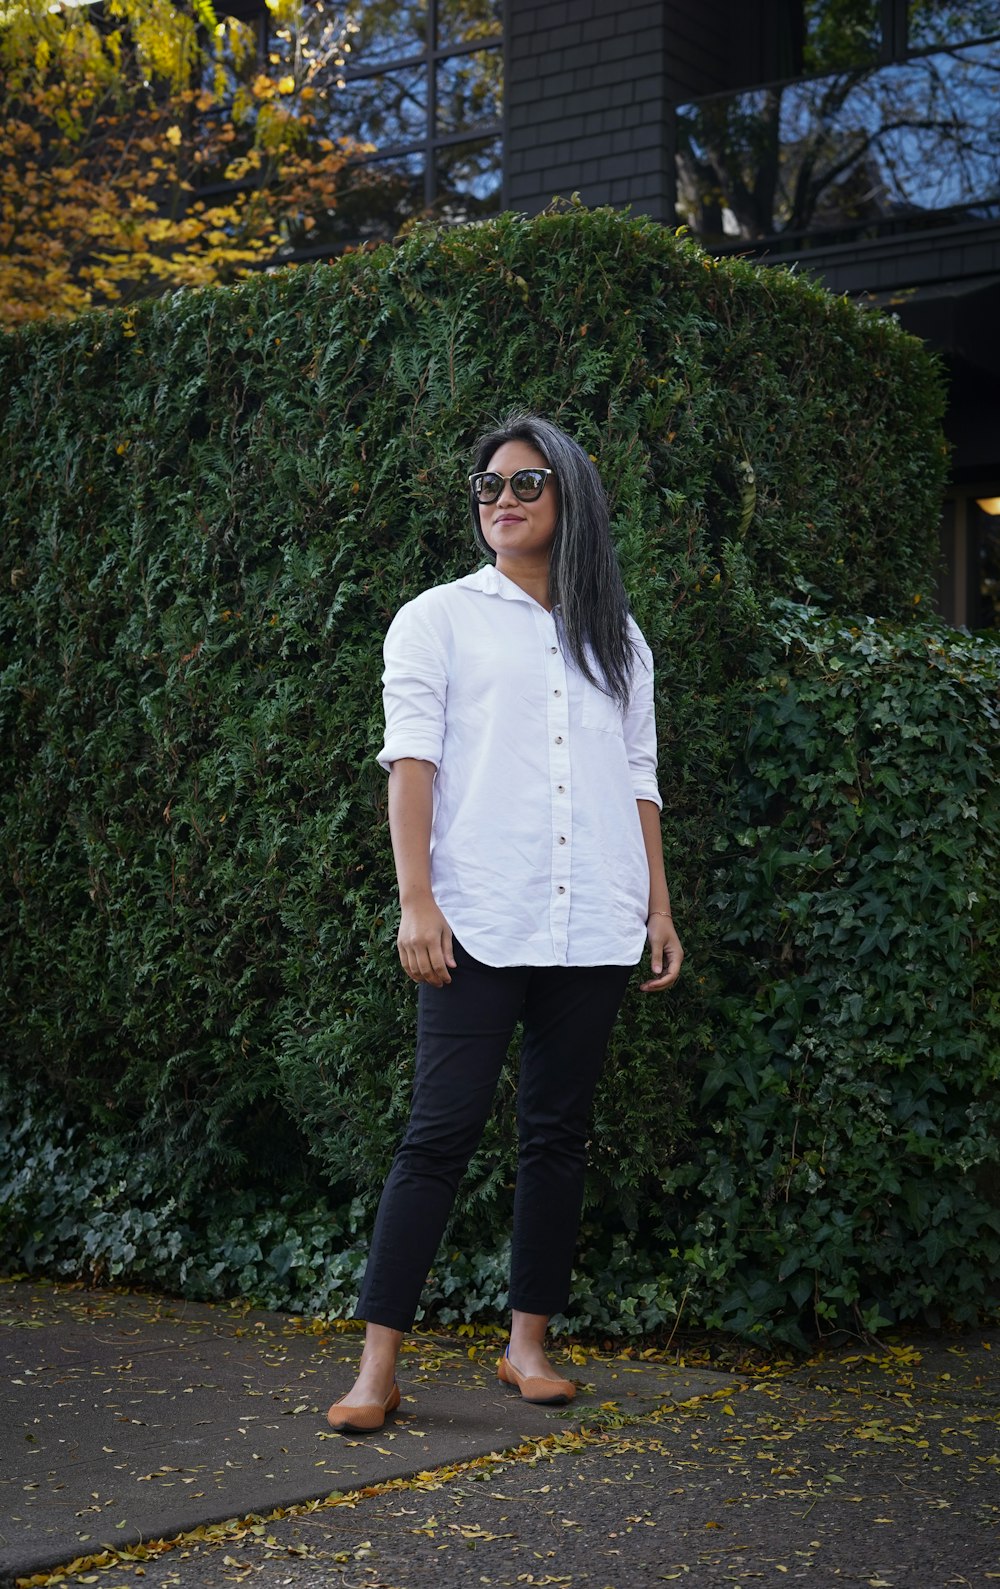 woman in white button up shirt and black pants standing near green plants during daytime